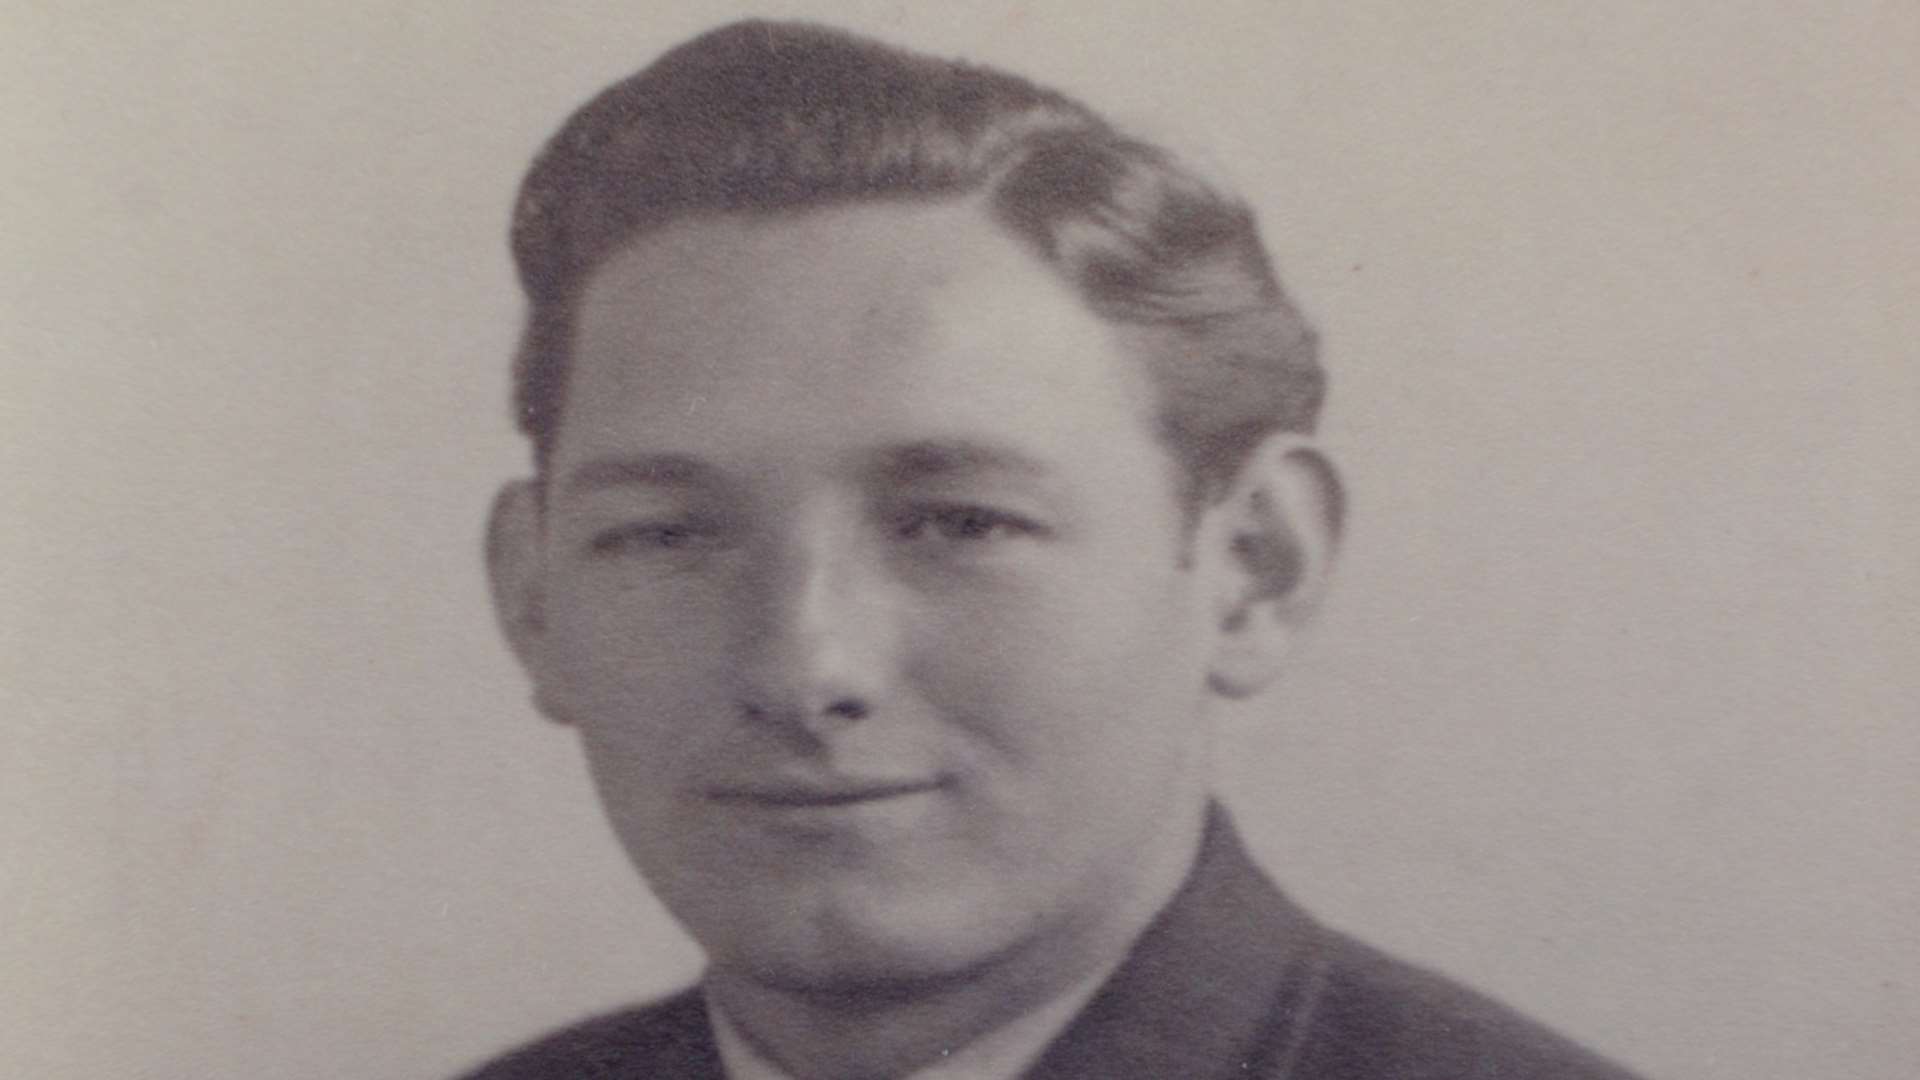 John (Jack) Roots aged 19 in 1942